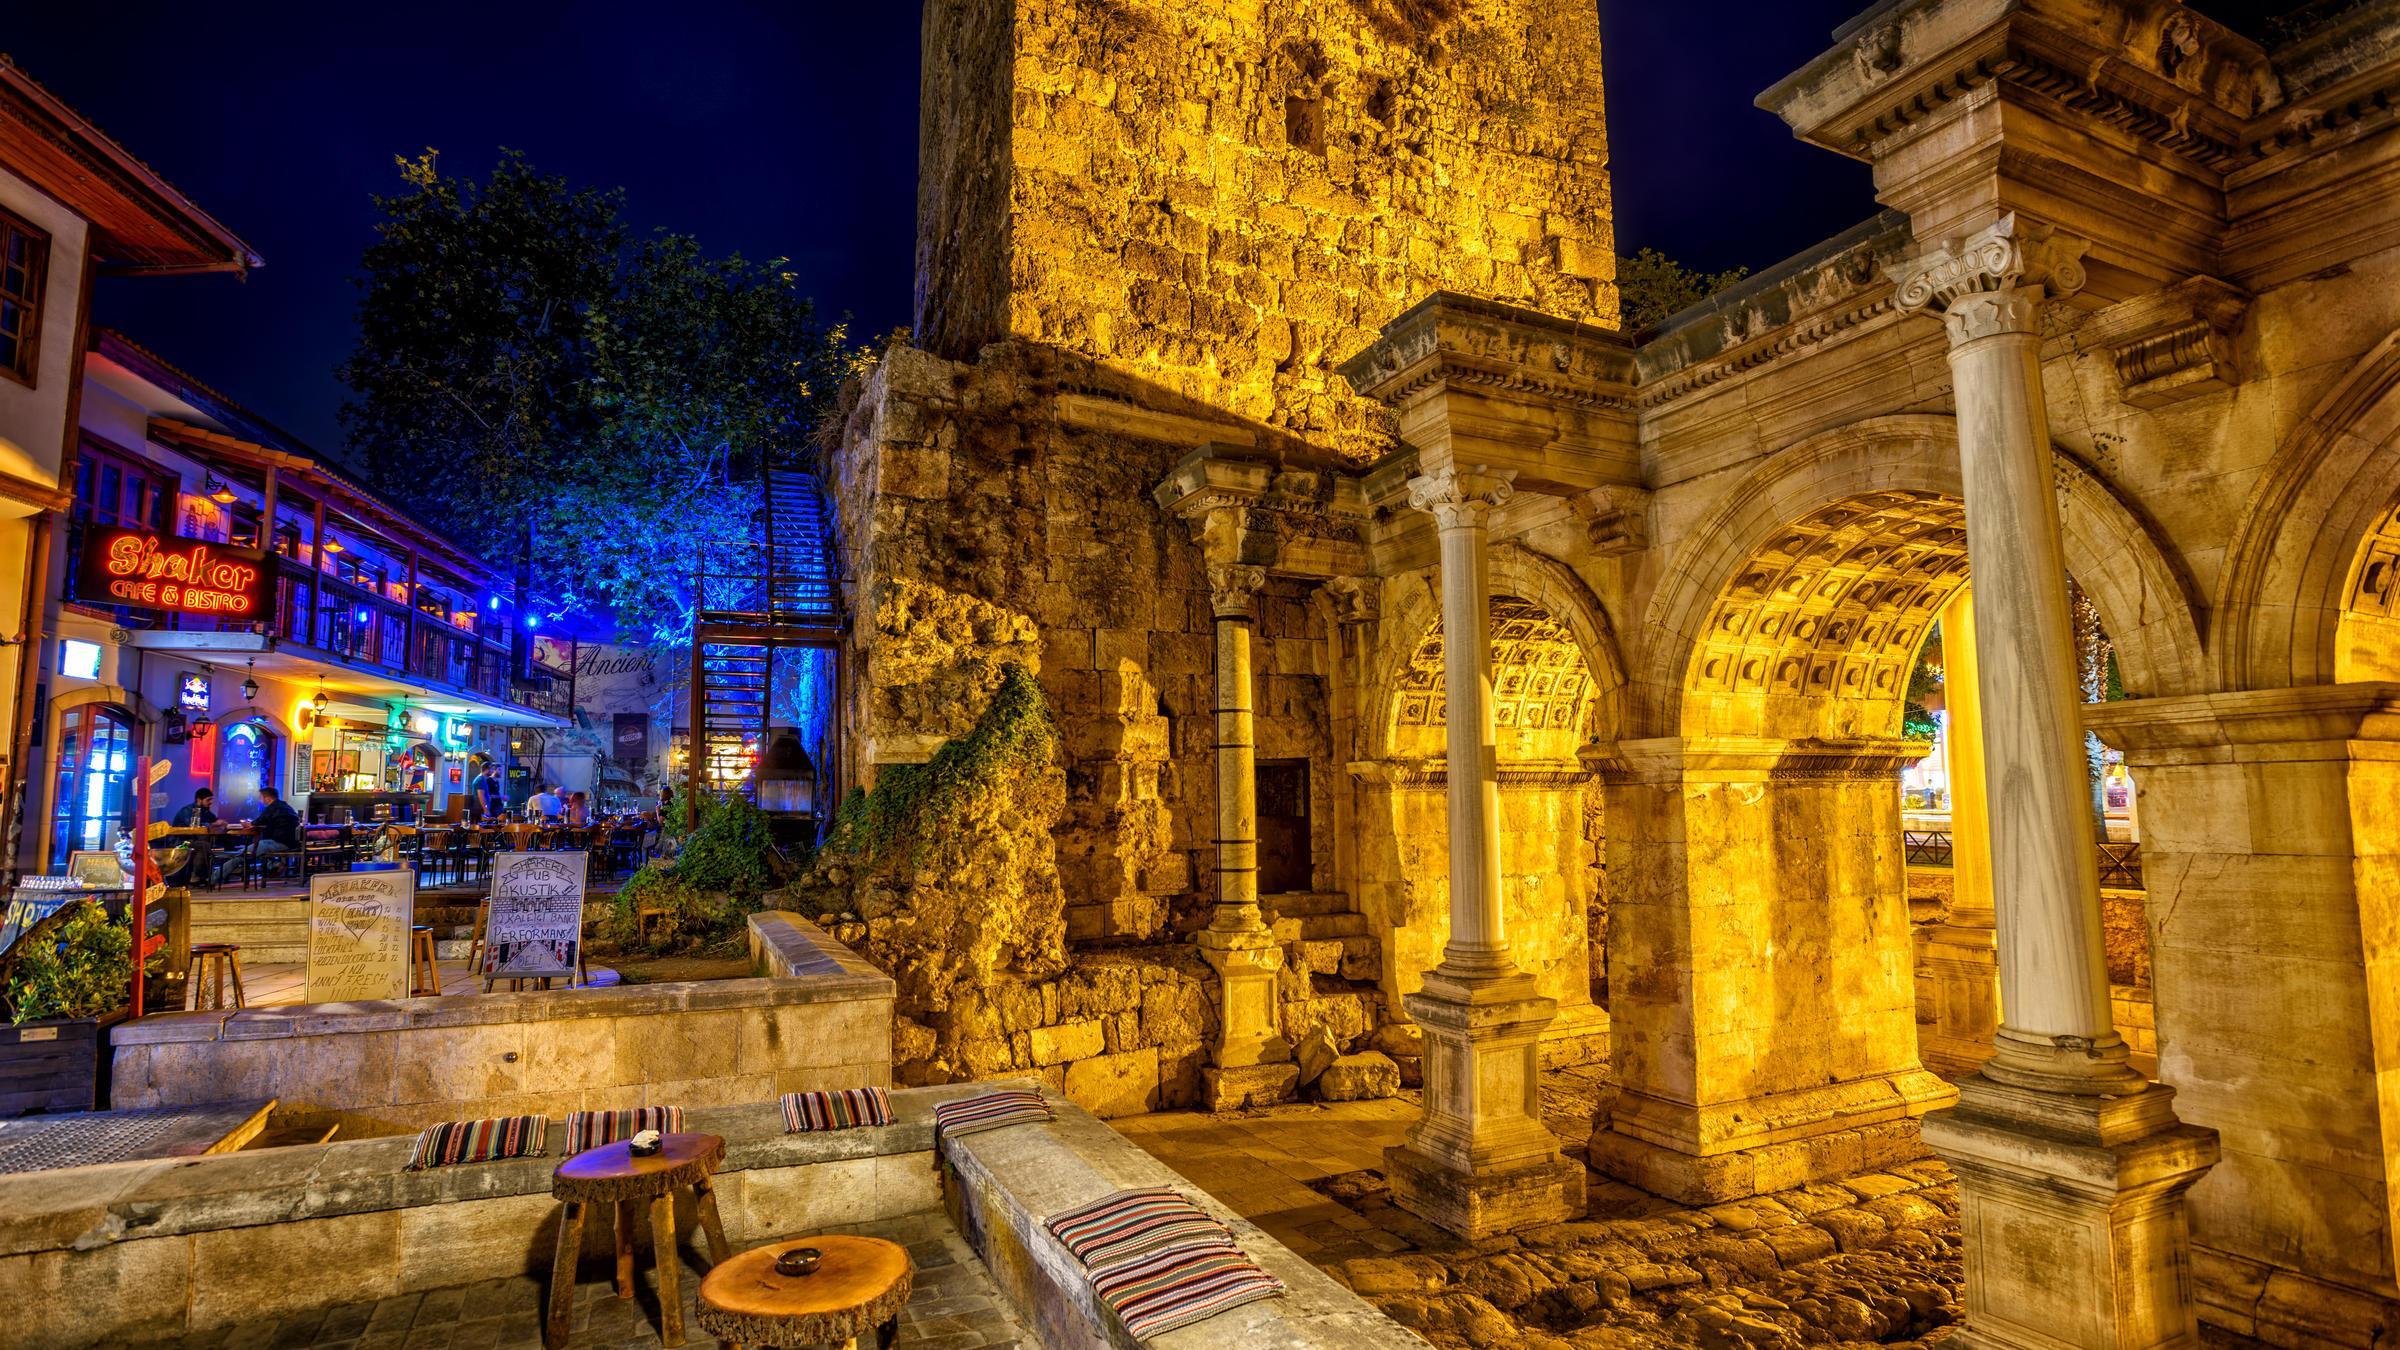 A night view from the famous historical ruin of Turkeys Antalya Hadrians Gate